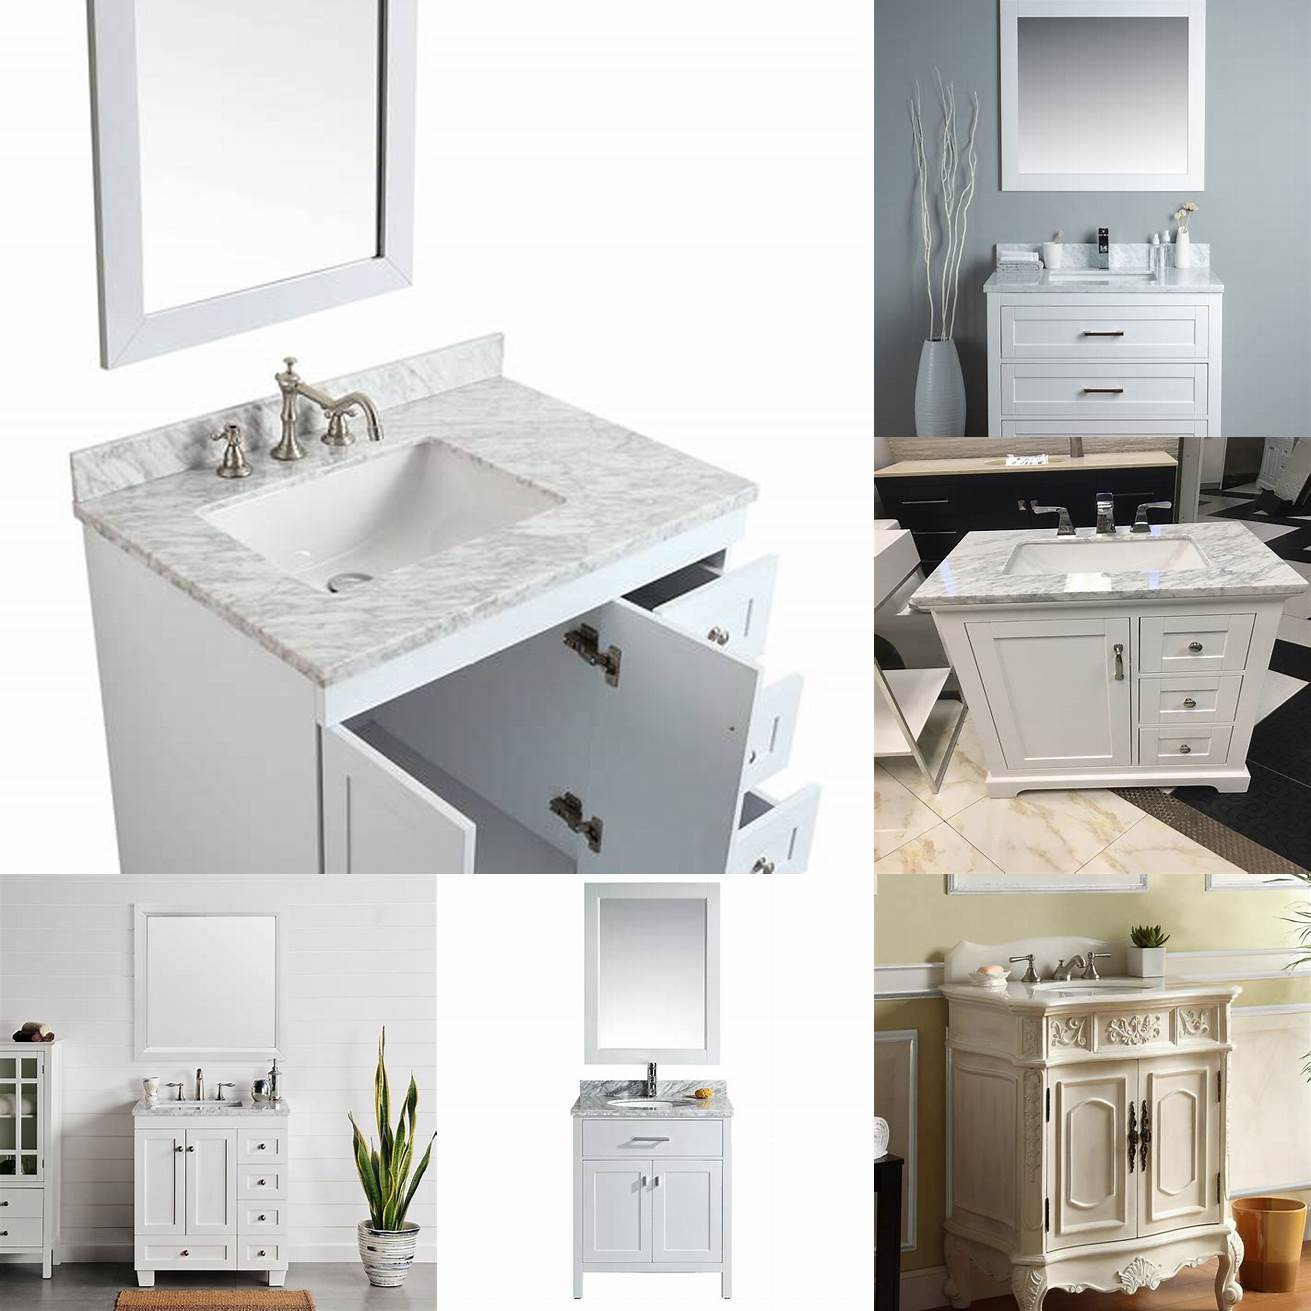 A photo of the White 30 Inch Bathroom Vanity with a matching mirror